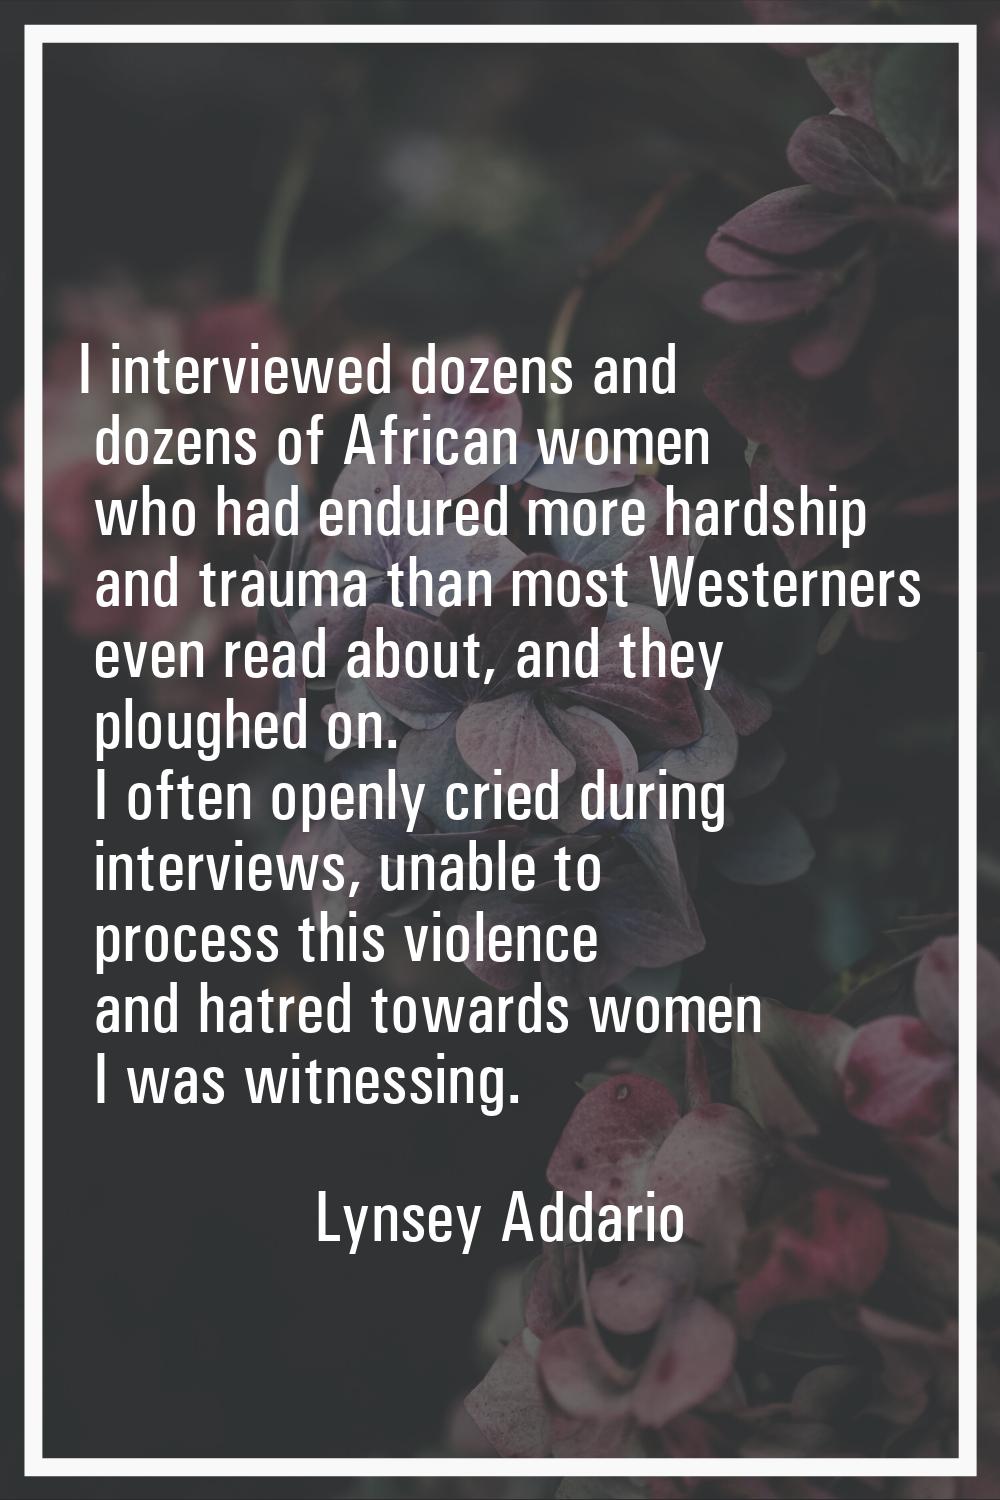 I interviewed dozens and dozens of African women who had endured more hardship and trauma than most